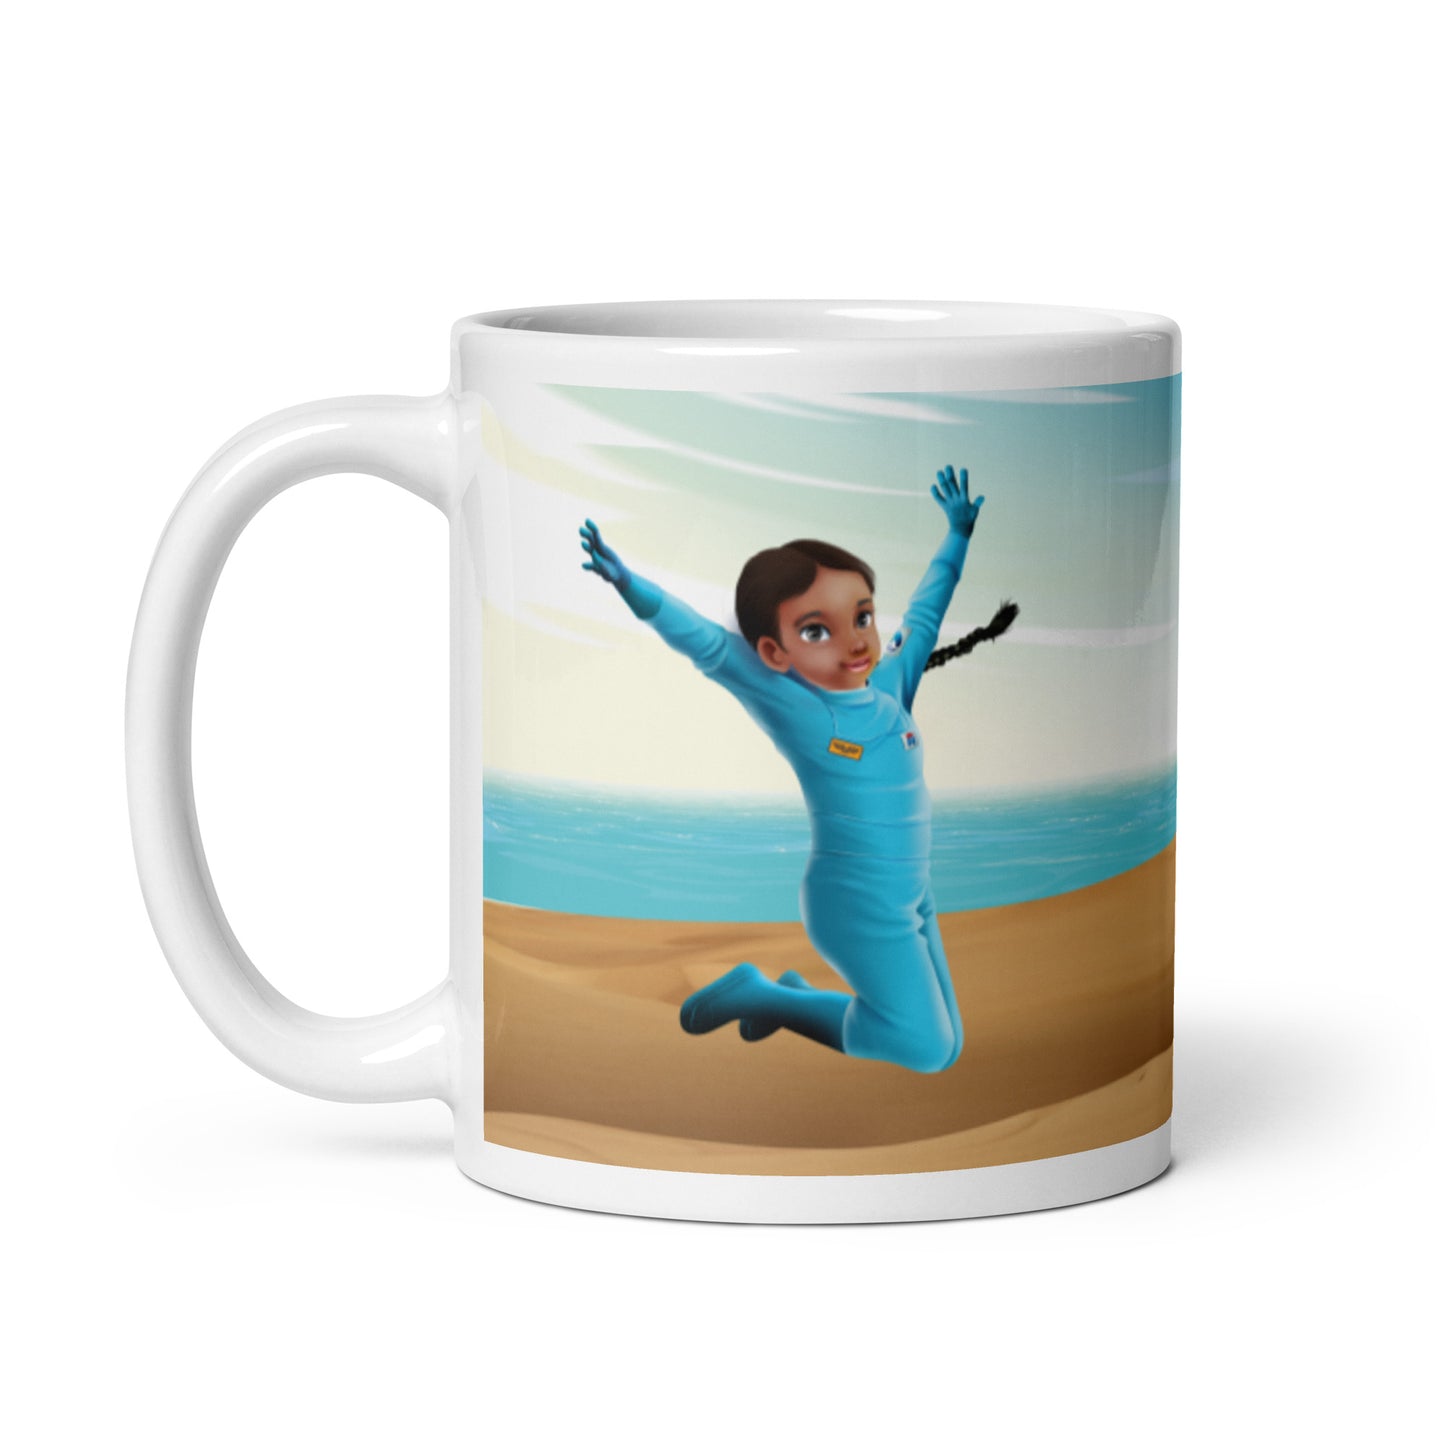 Artemis Mug. Inspirational mugs are one of our best gift options. Great for STEM lovers, students and Space Industry workers.